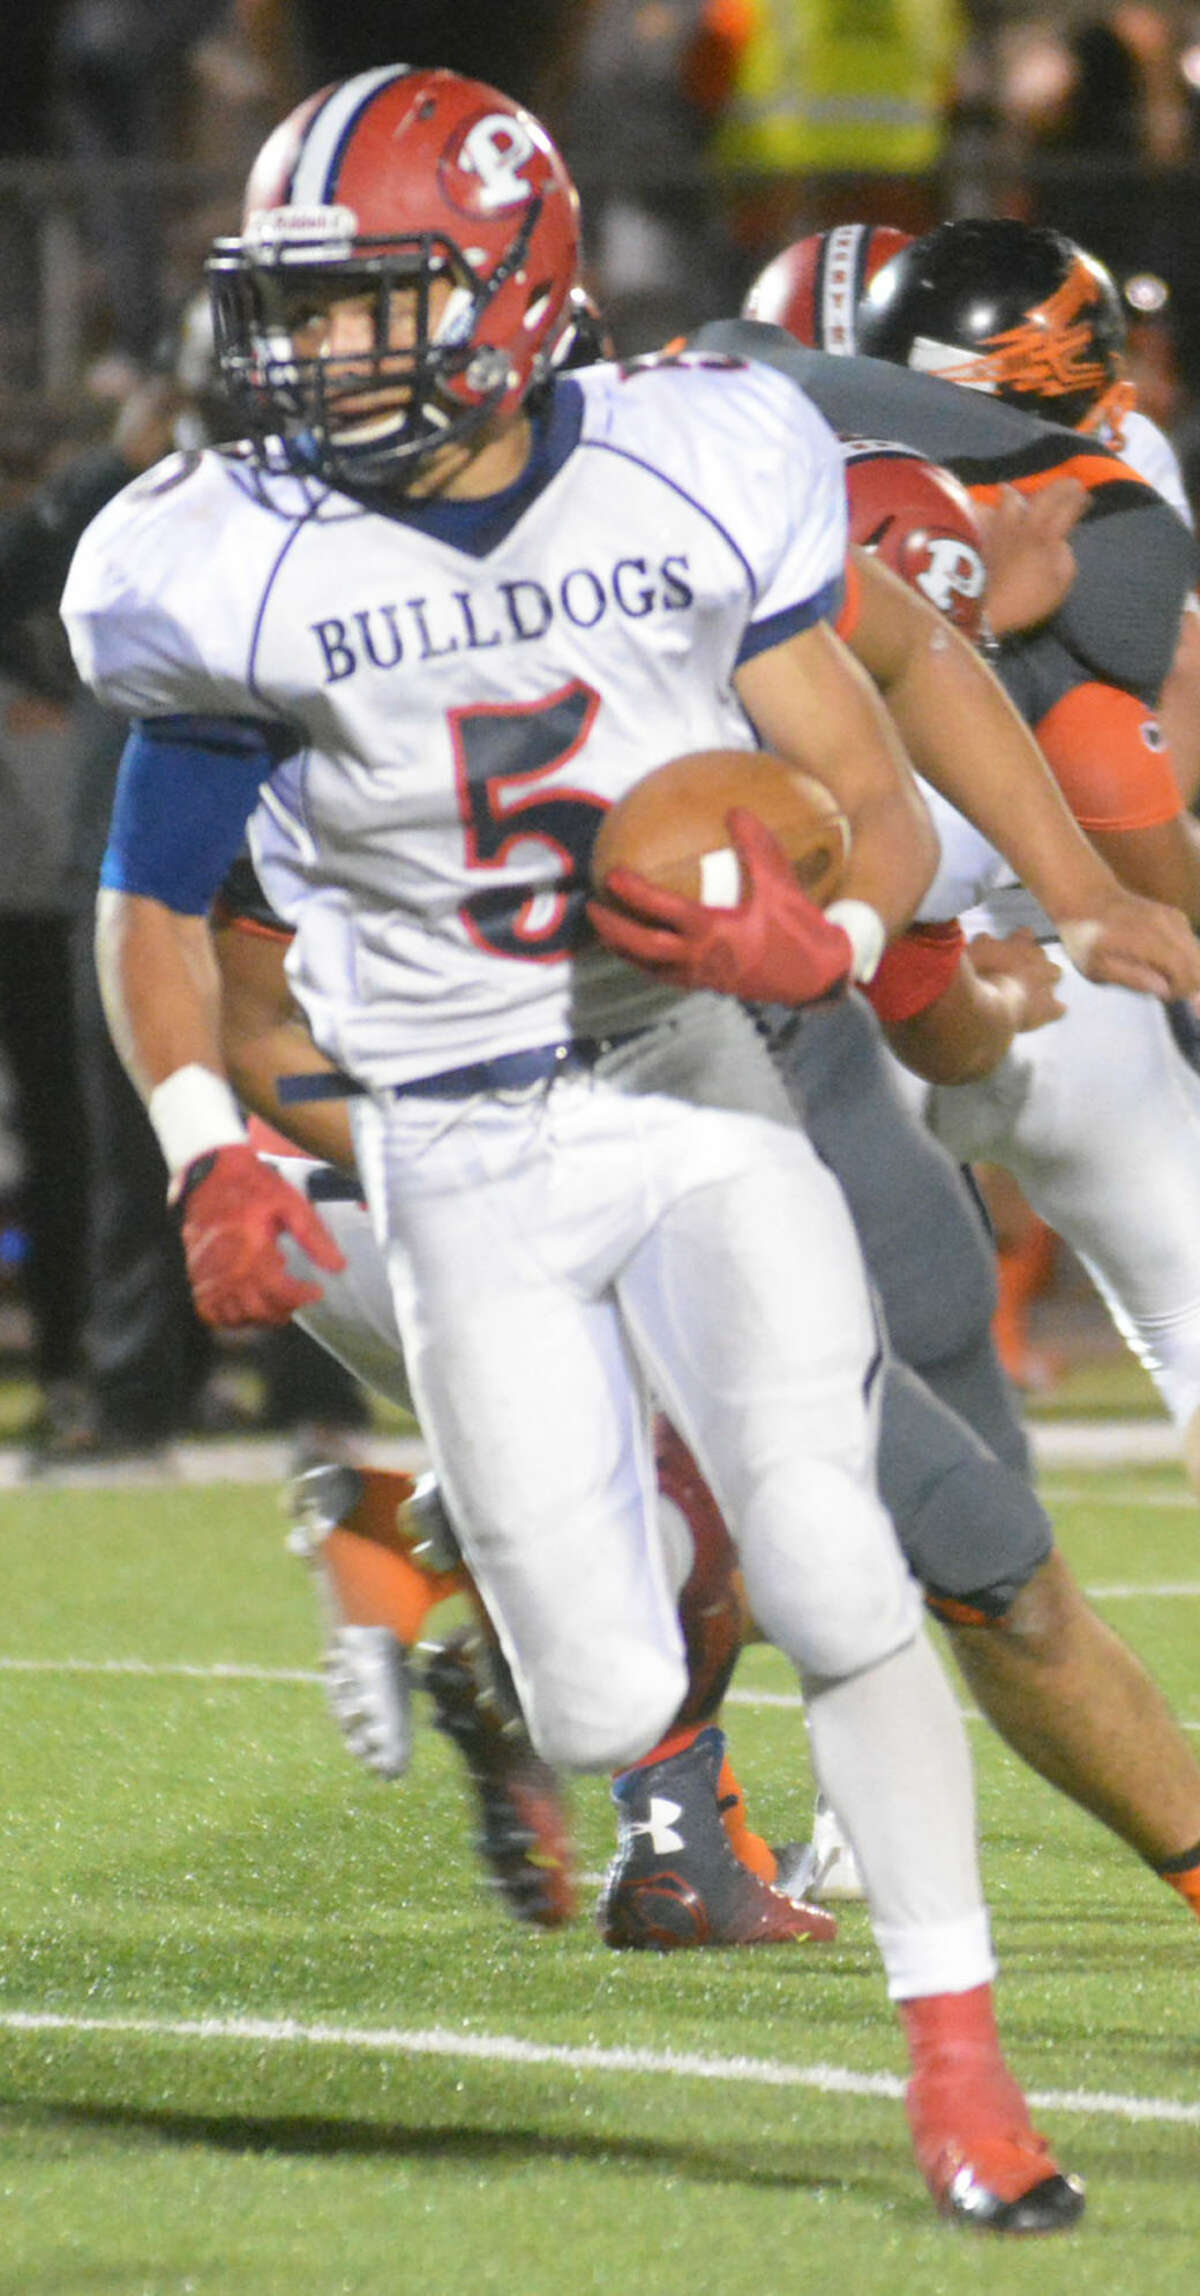 Plainview running back Warren Flye runs for yardage against Dumas last week. The senior leads District 4-5A in rushing and scoring as the teams head into the second half of the season.